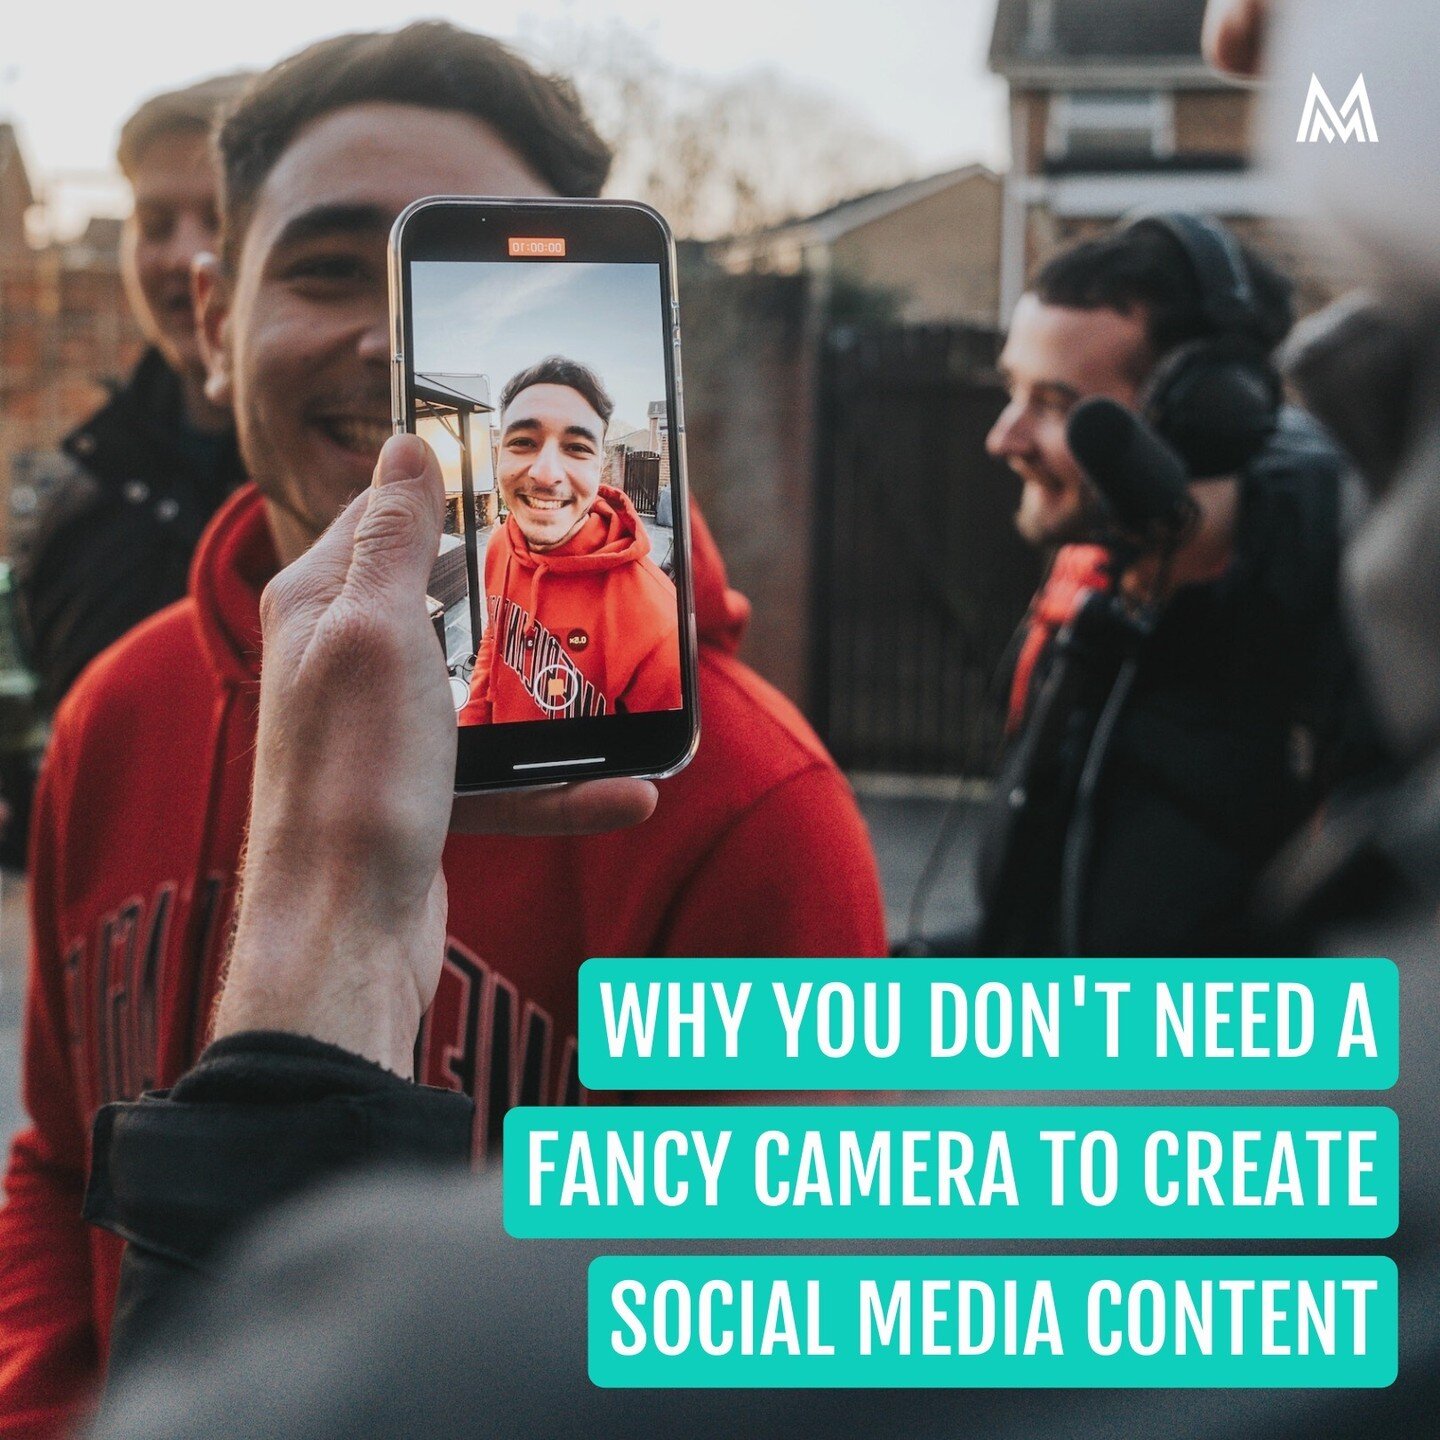 A lot of people don't shoot videos because they want it to look 'perfect'. They think they need an expensive camera and a professional script.

But what if we told you that unprofessional content actually works BETTER on social media? (In most cases)